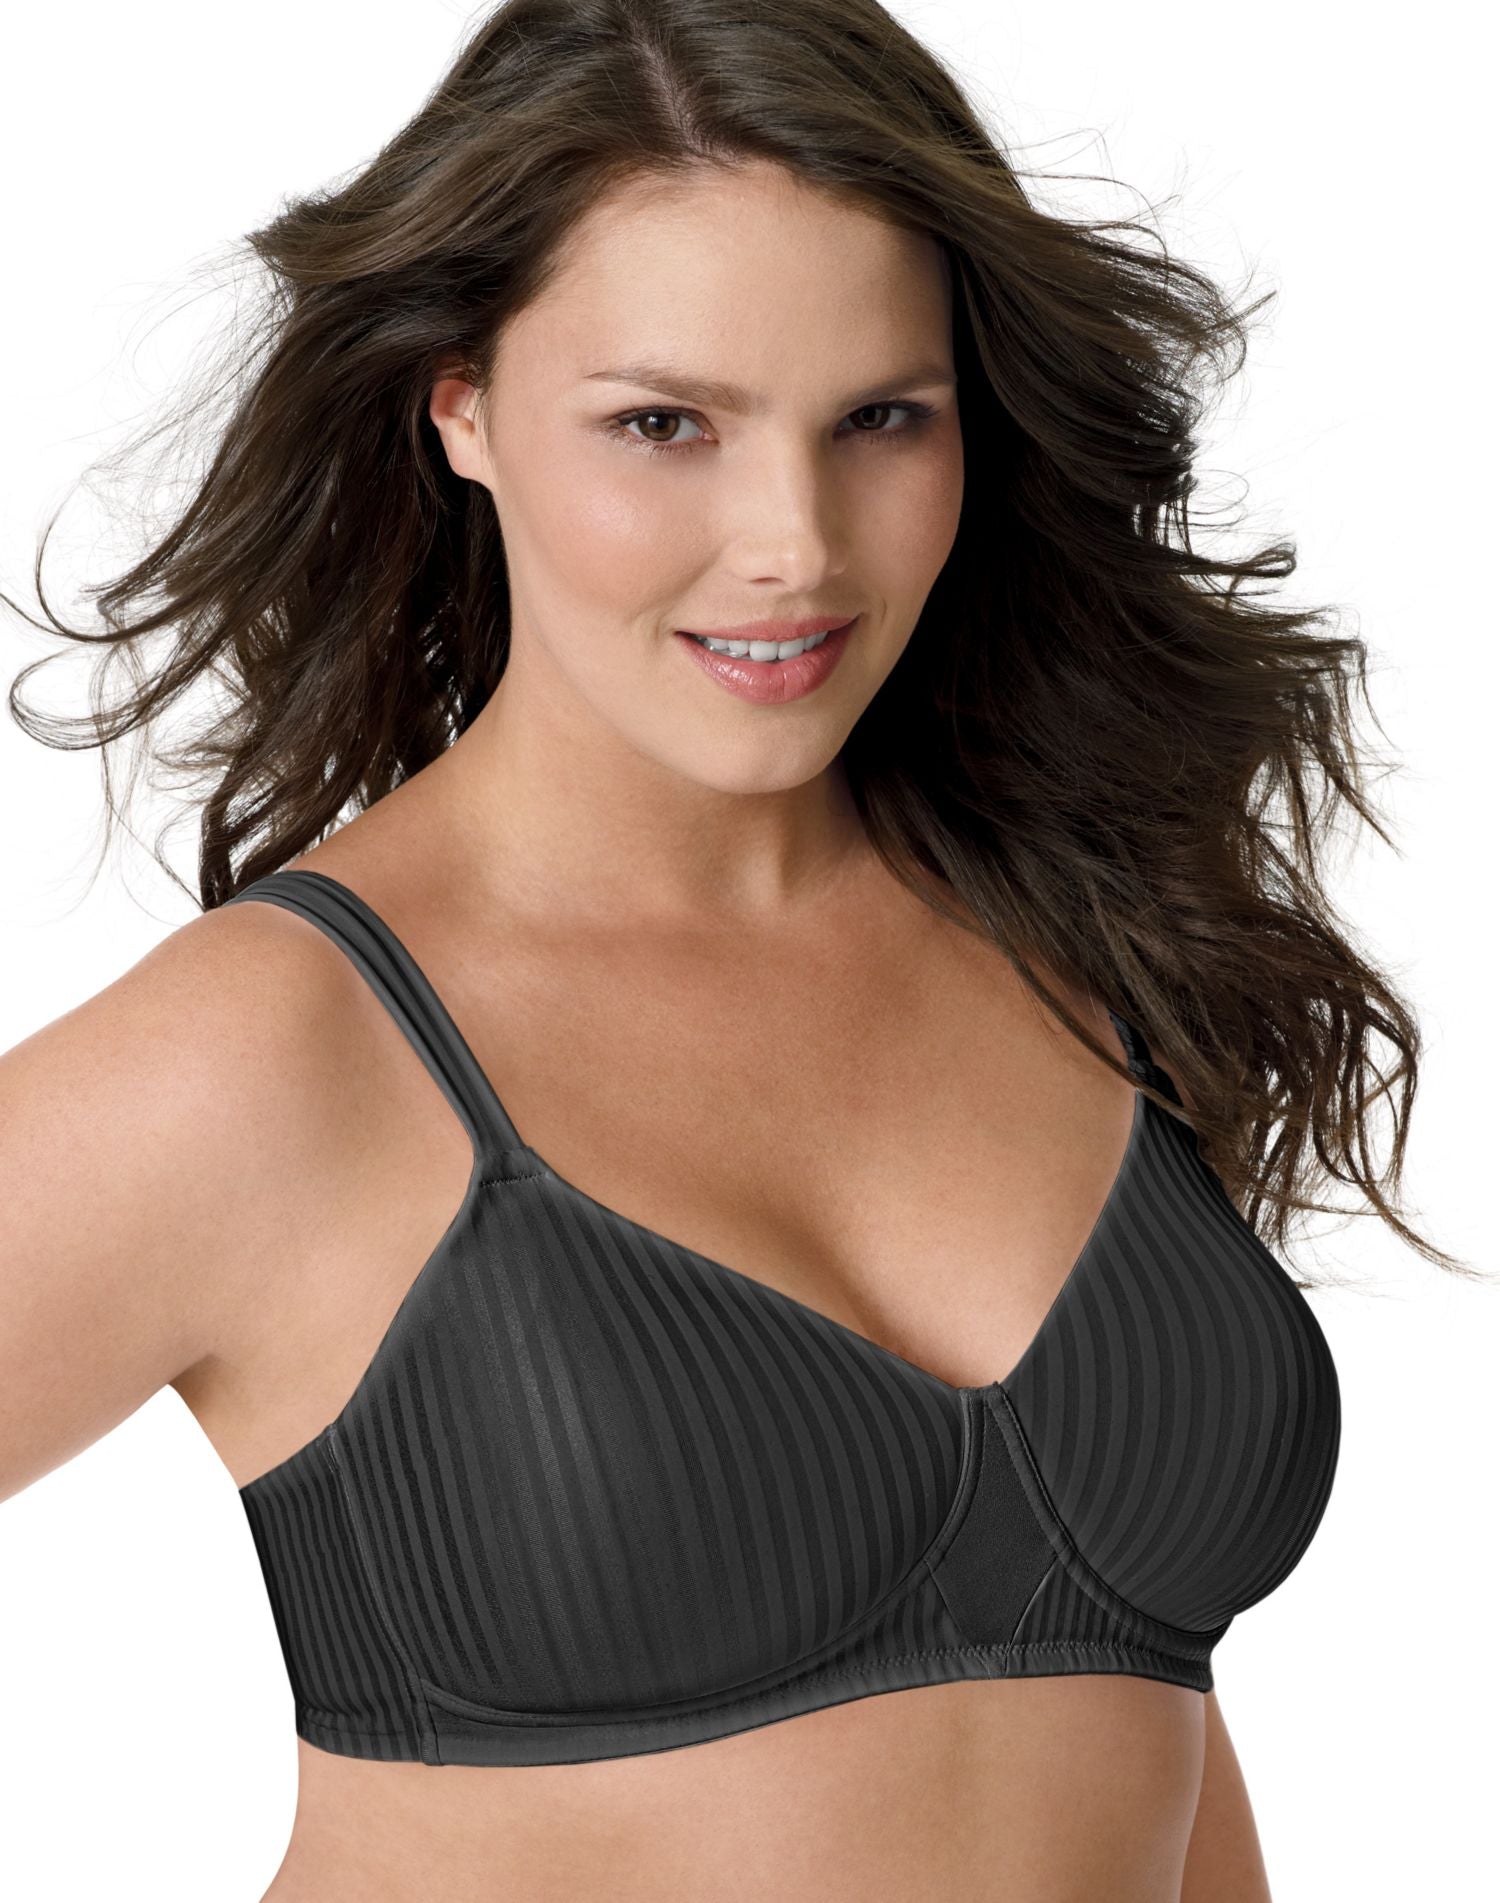 Playtex Womens Secrets All Over Smoothing Full-Figure Wirefree Bra US4707